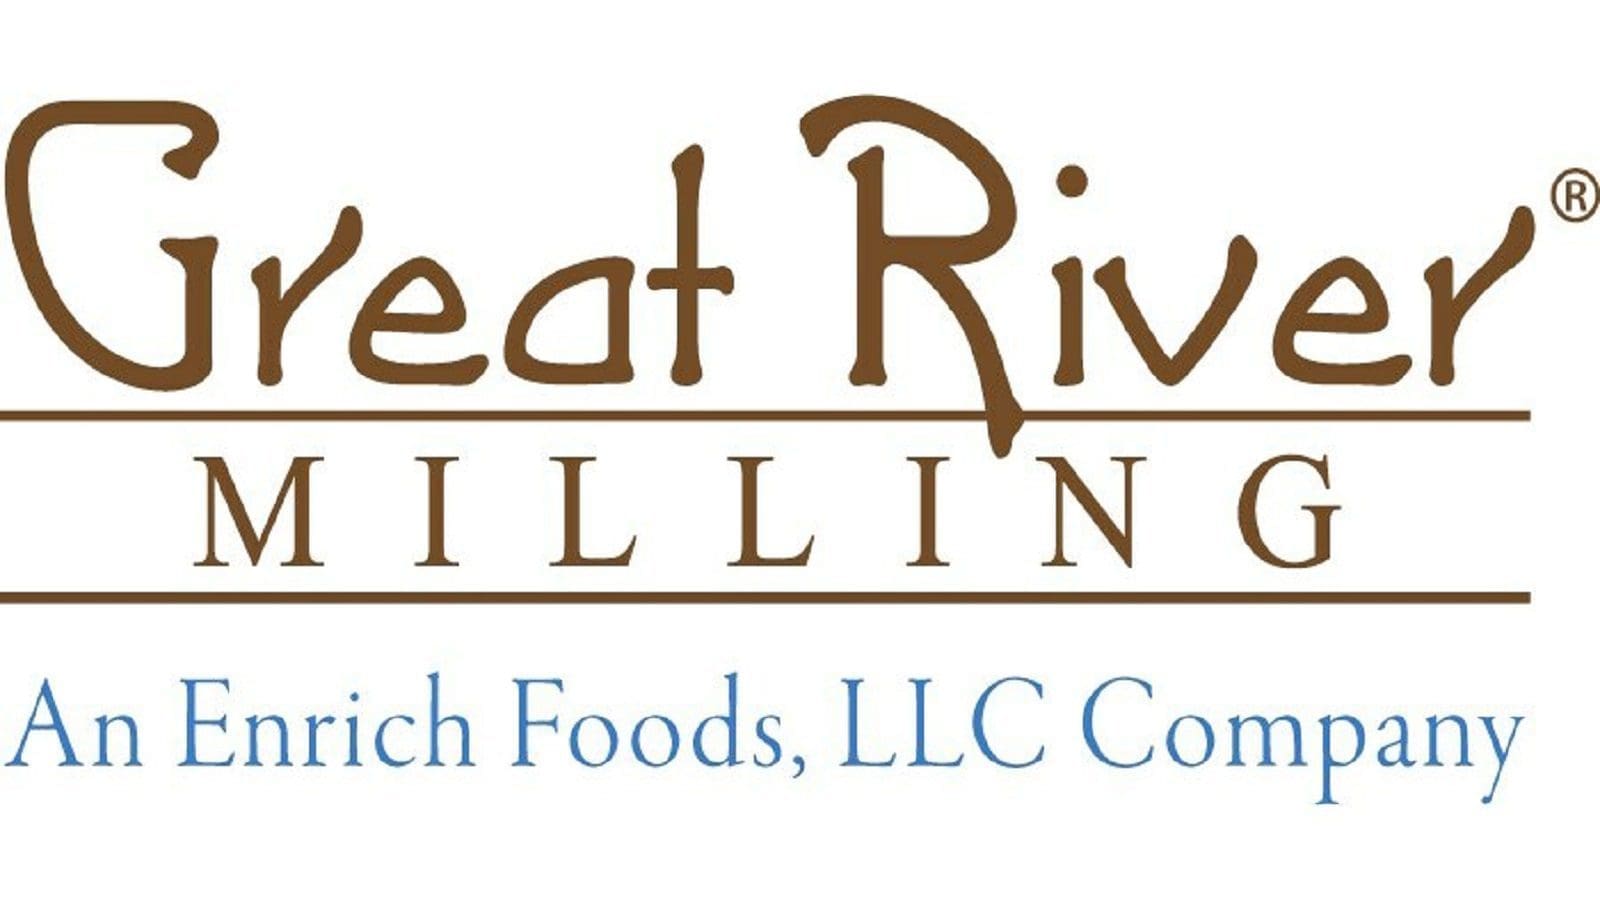 Columbia Grain International’s new subsidiary acquires Great River Milling